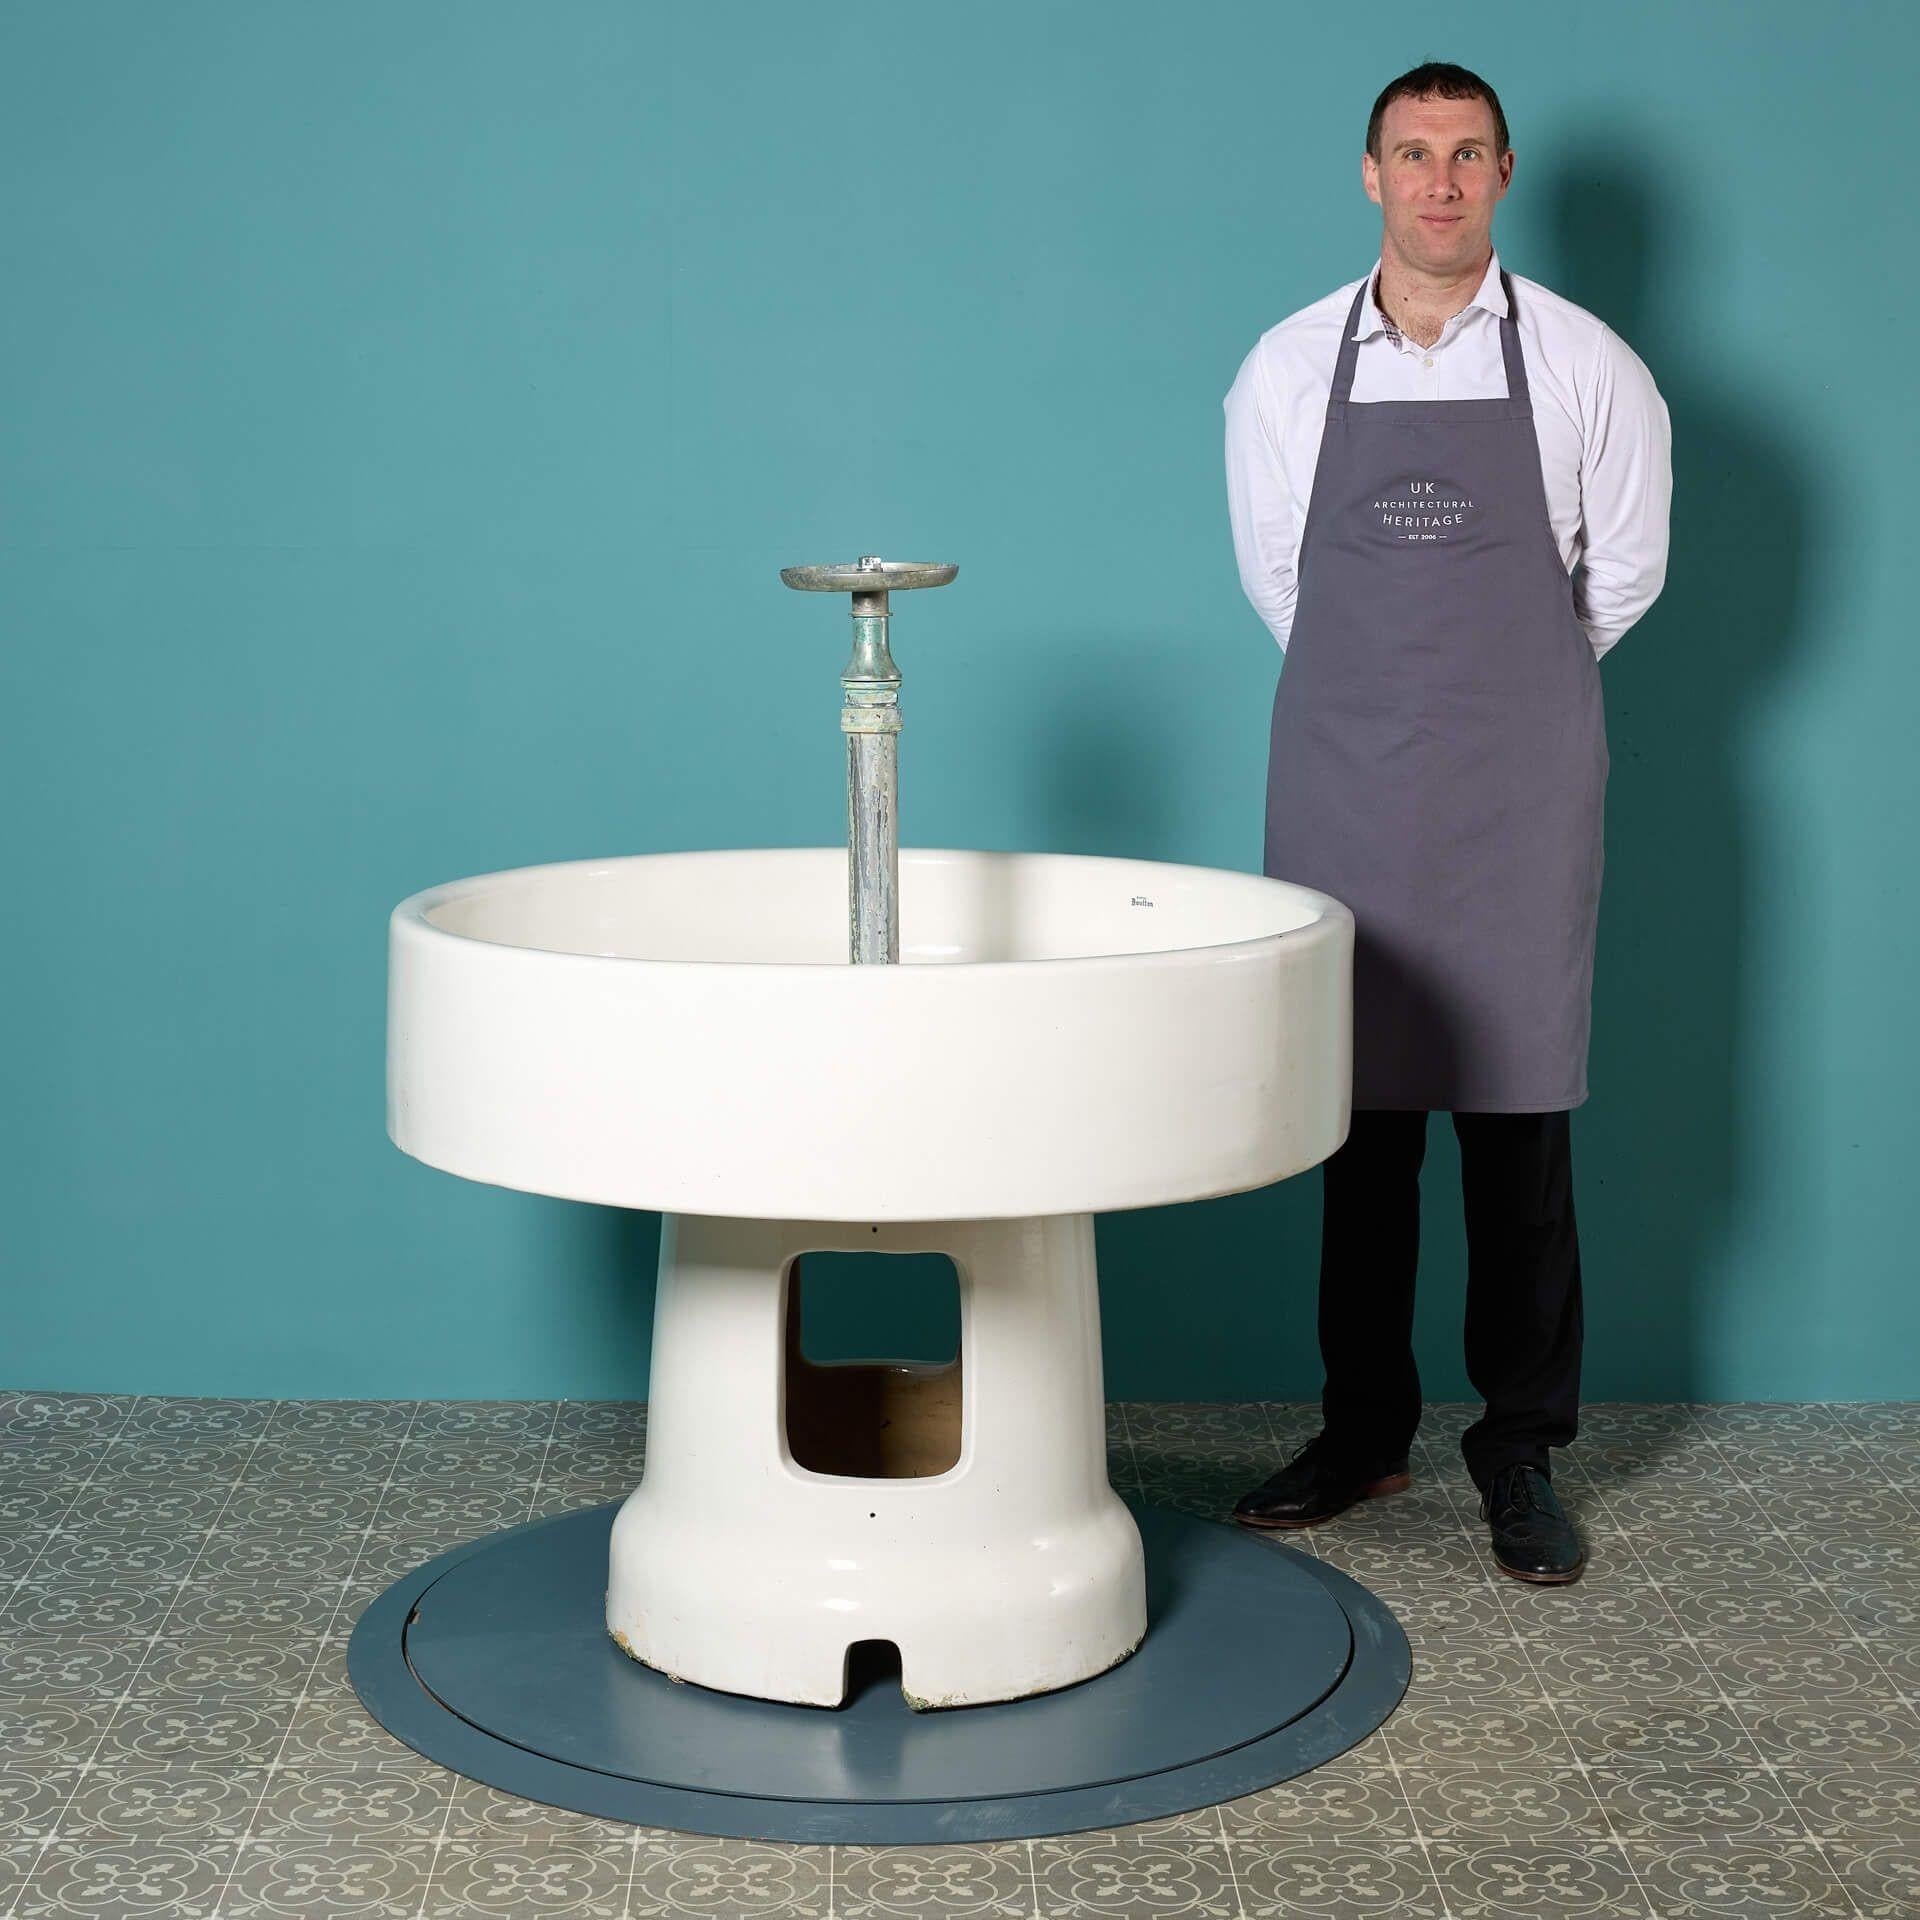 A large and impressive freestanding circular sink by Royal Doulton. This spectacular sink is ideal for a commercial bathroom project as a communal sink but could also be used in a large interior such as a workshop or studio as a stylish, spacious